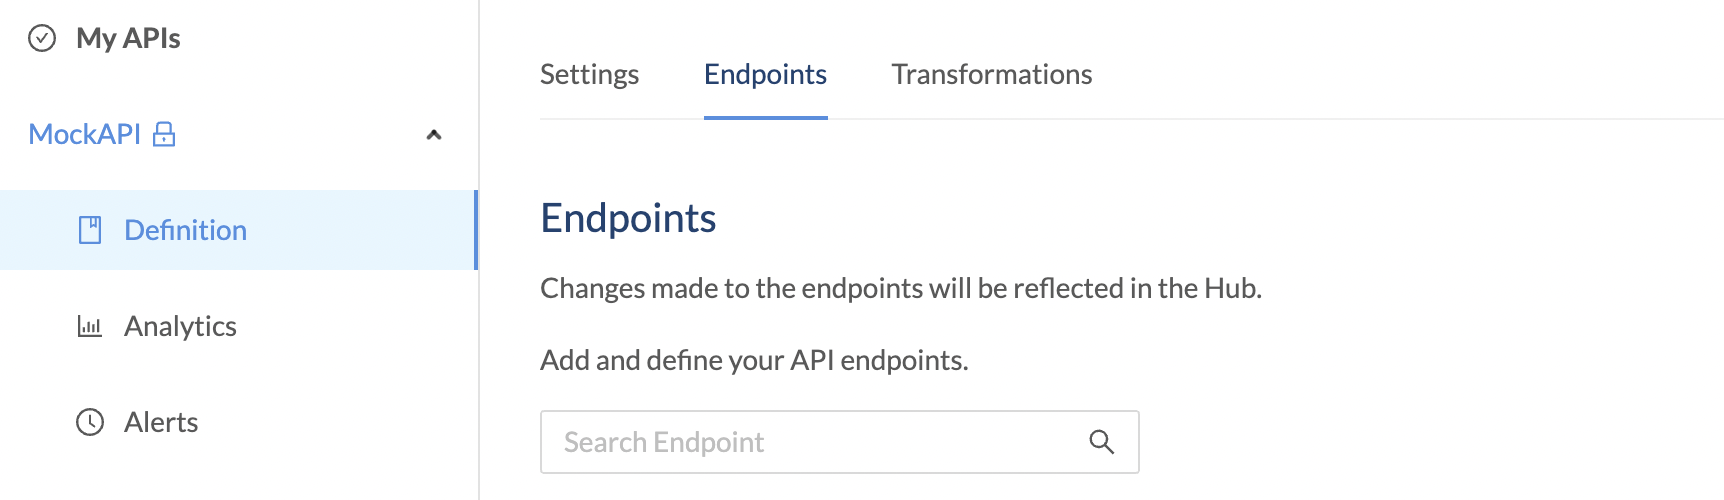 Defining endpoints for your APIs